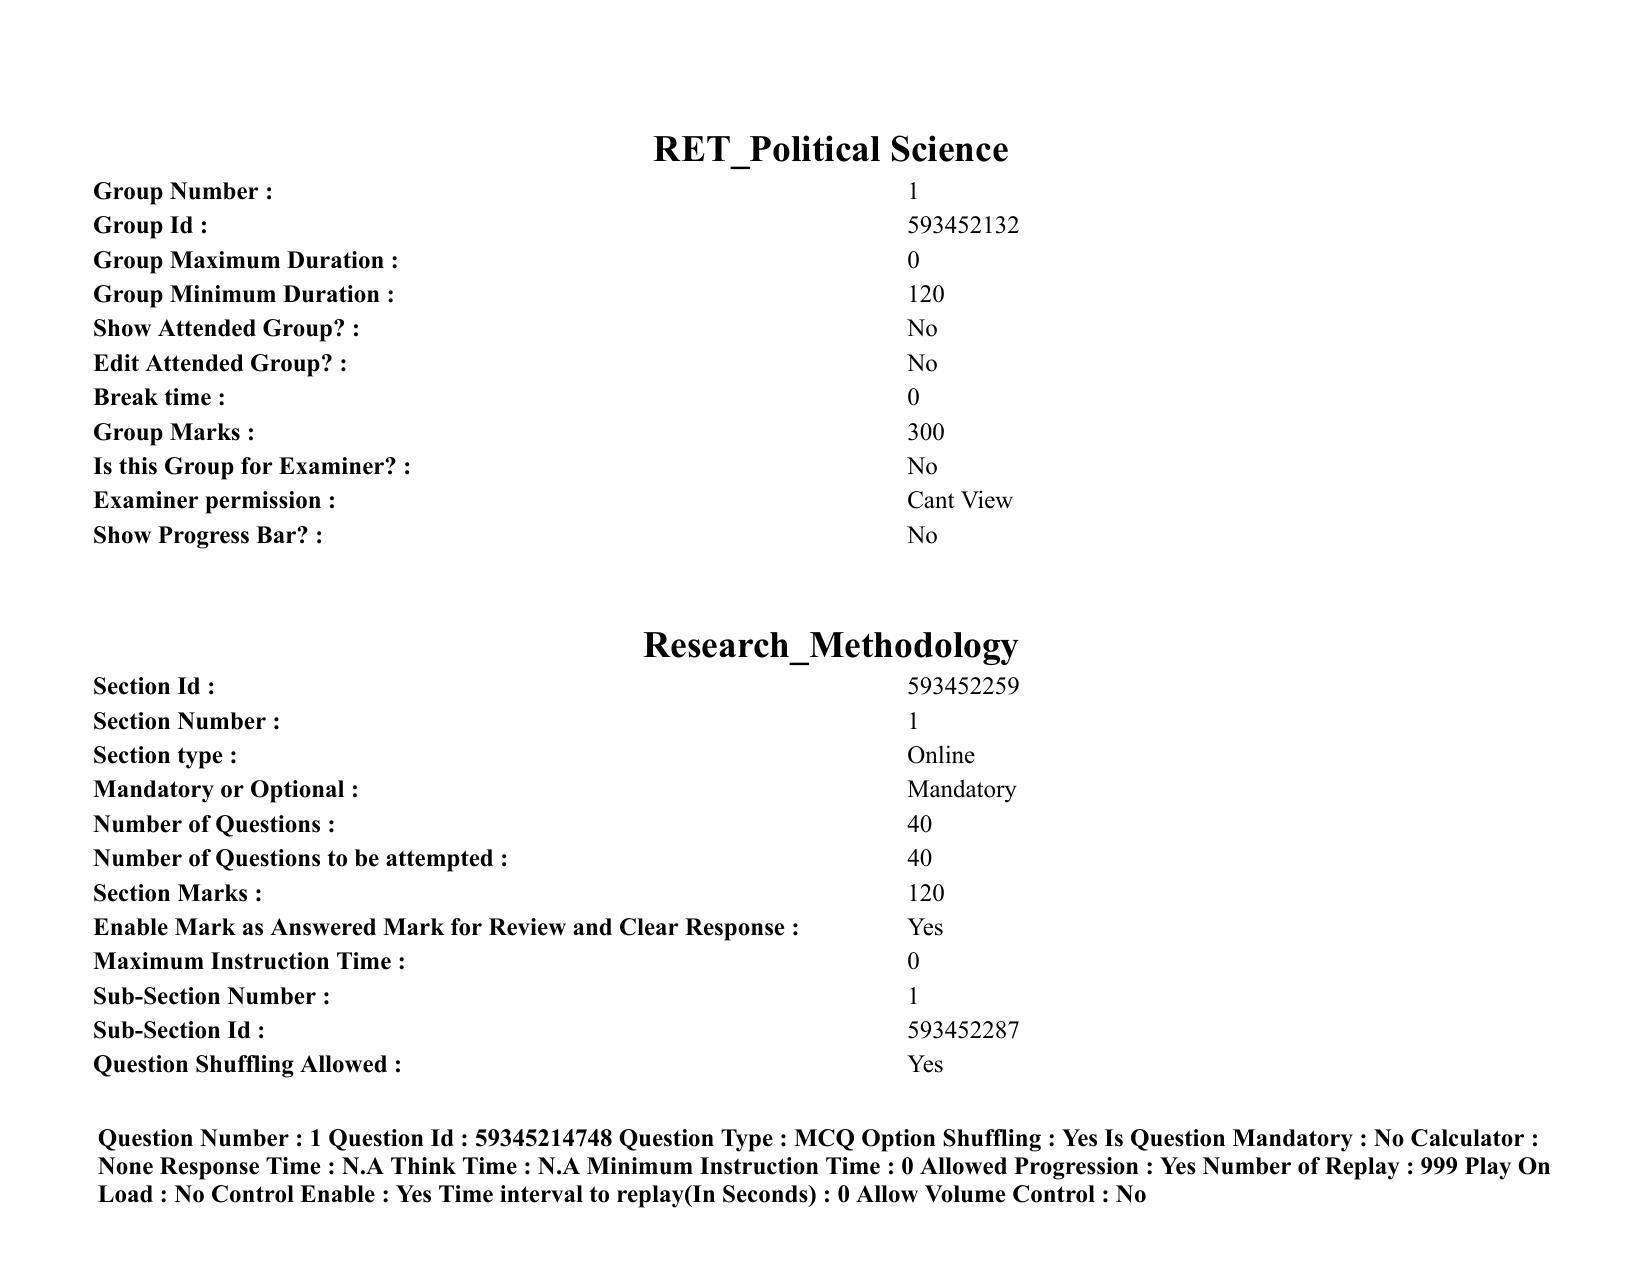 BHU RET Political Science 2021 Question Paper - Page 2